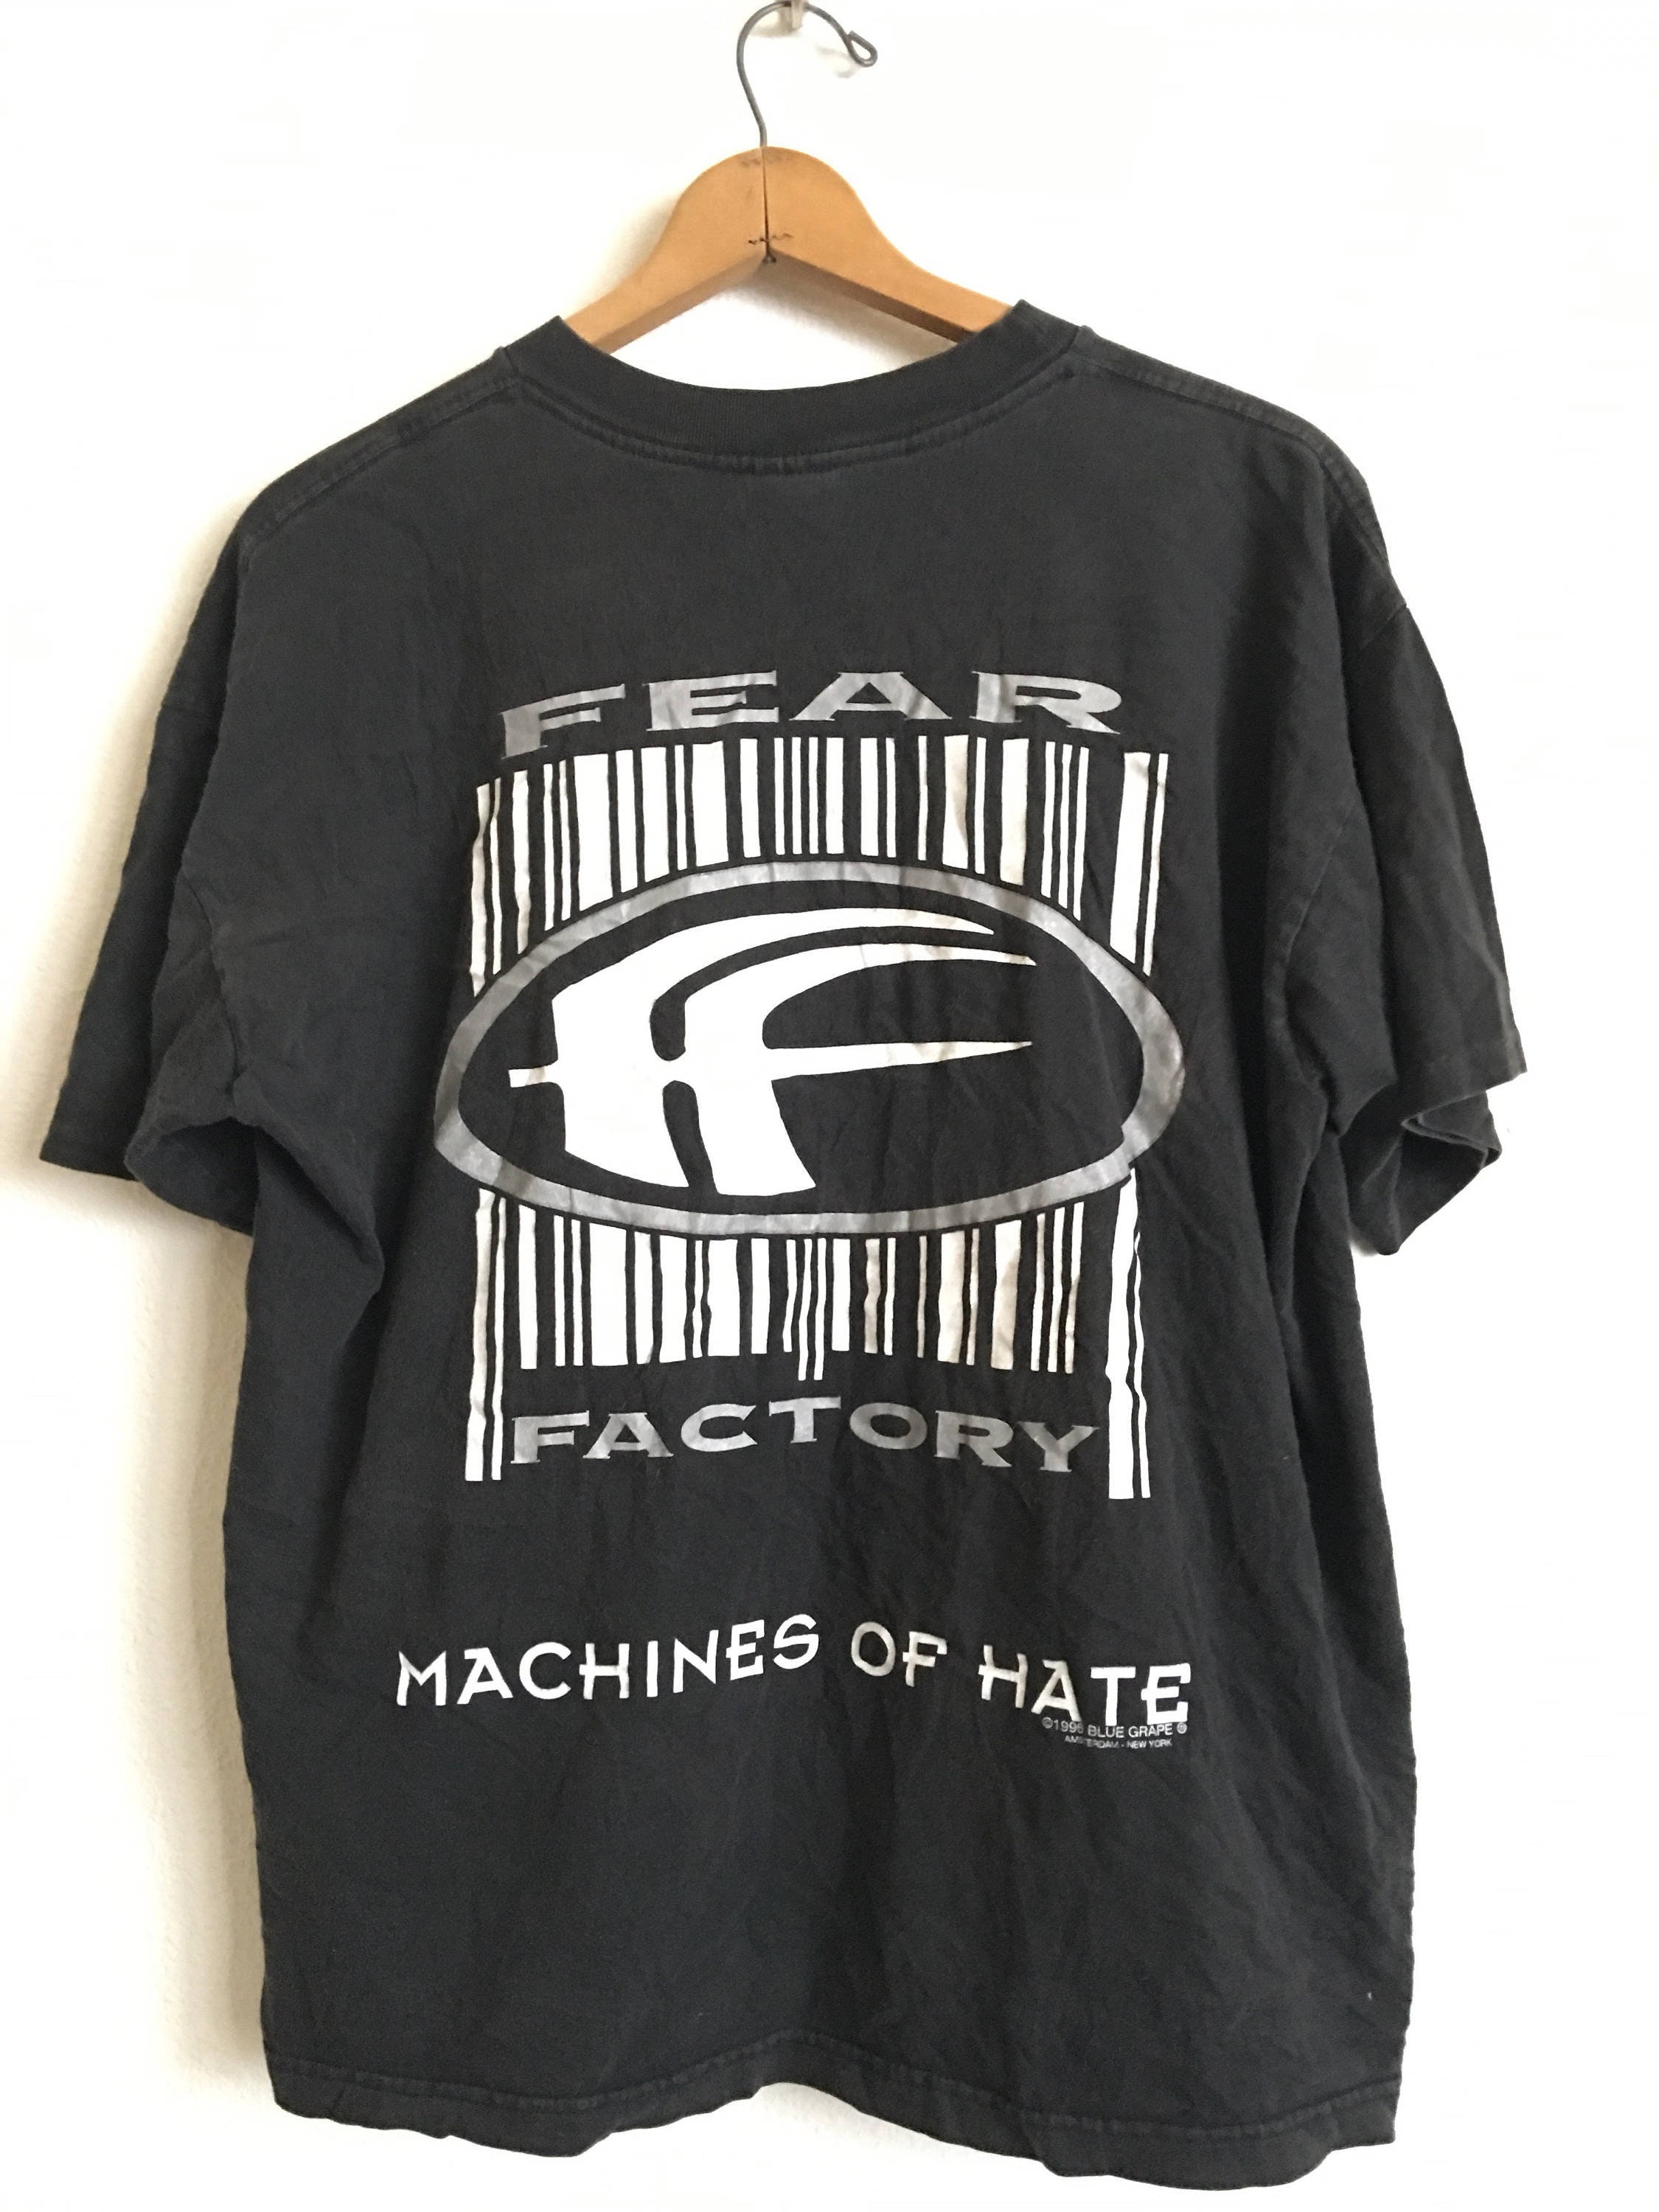 1996 FEAR FACTORY Machines Of Hate Barcode Double Sided Vintage T